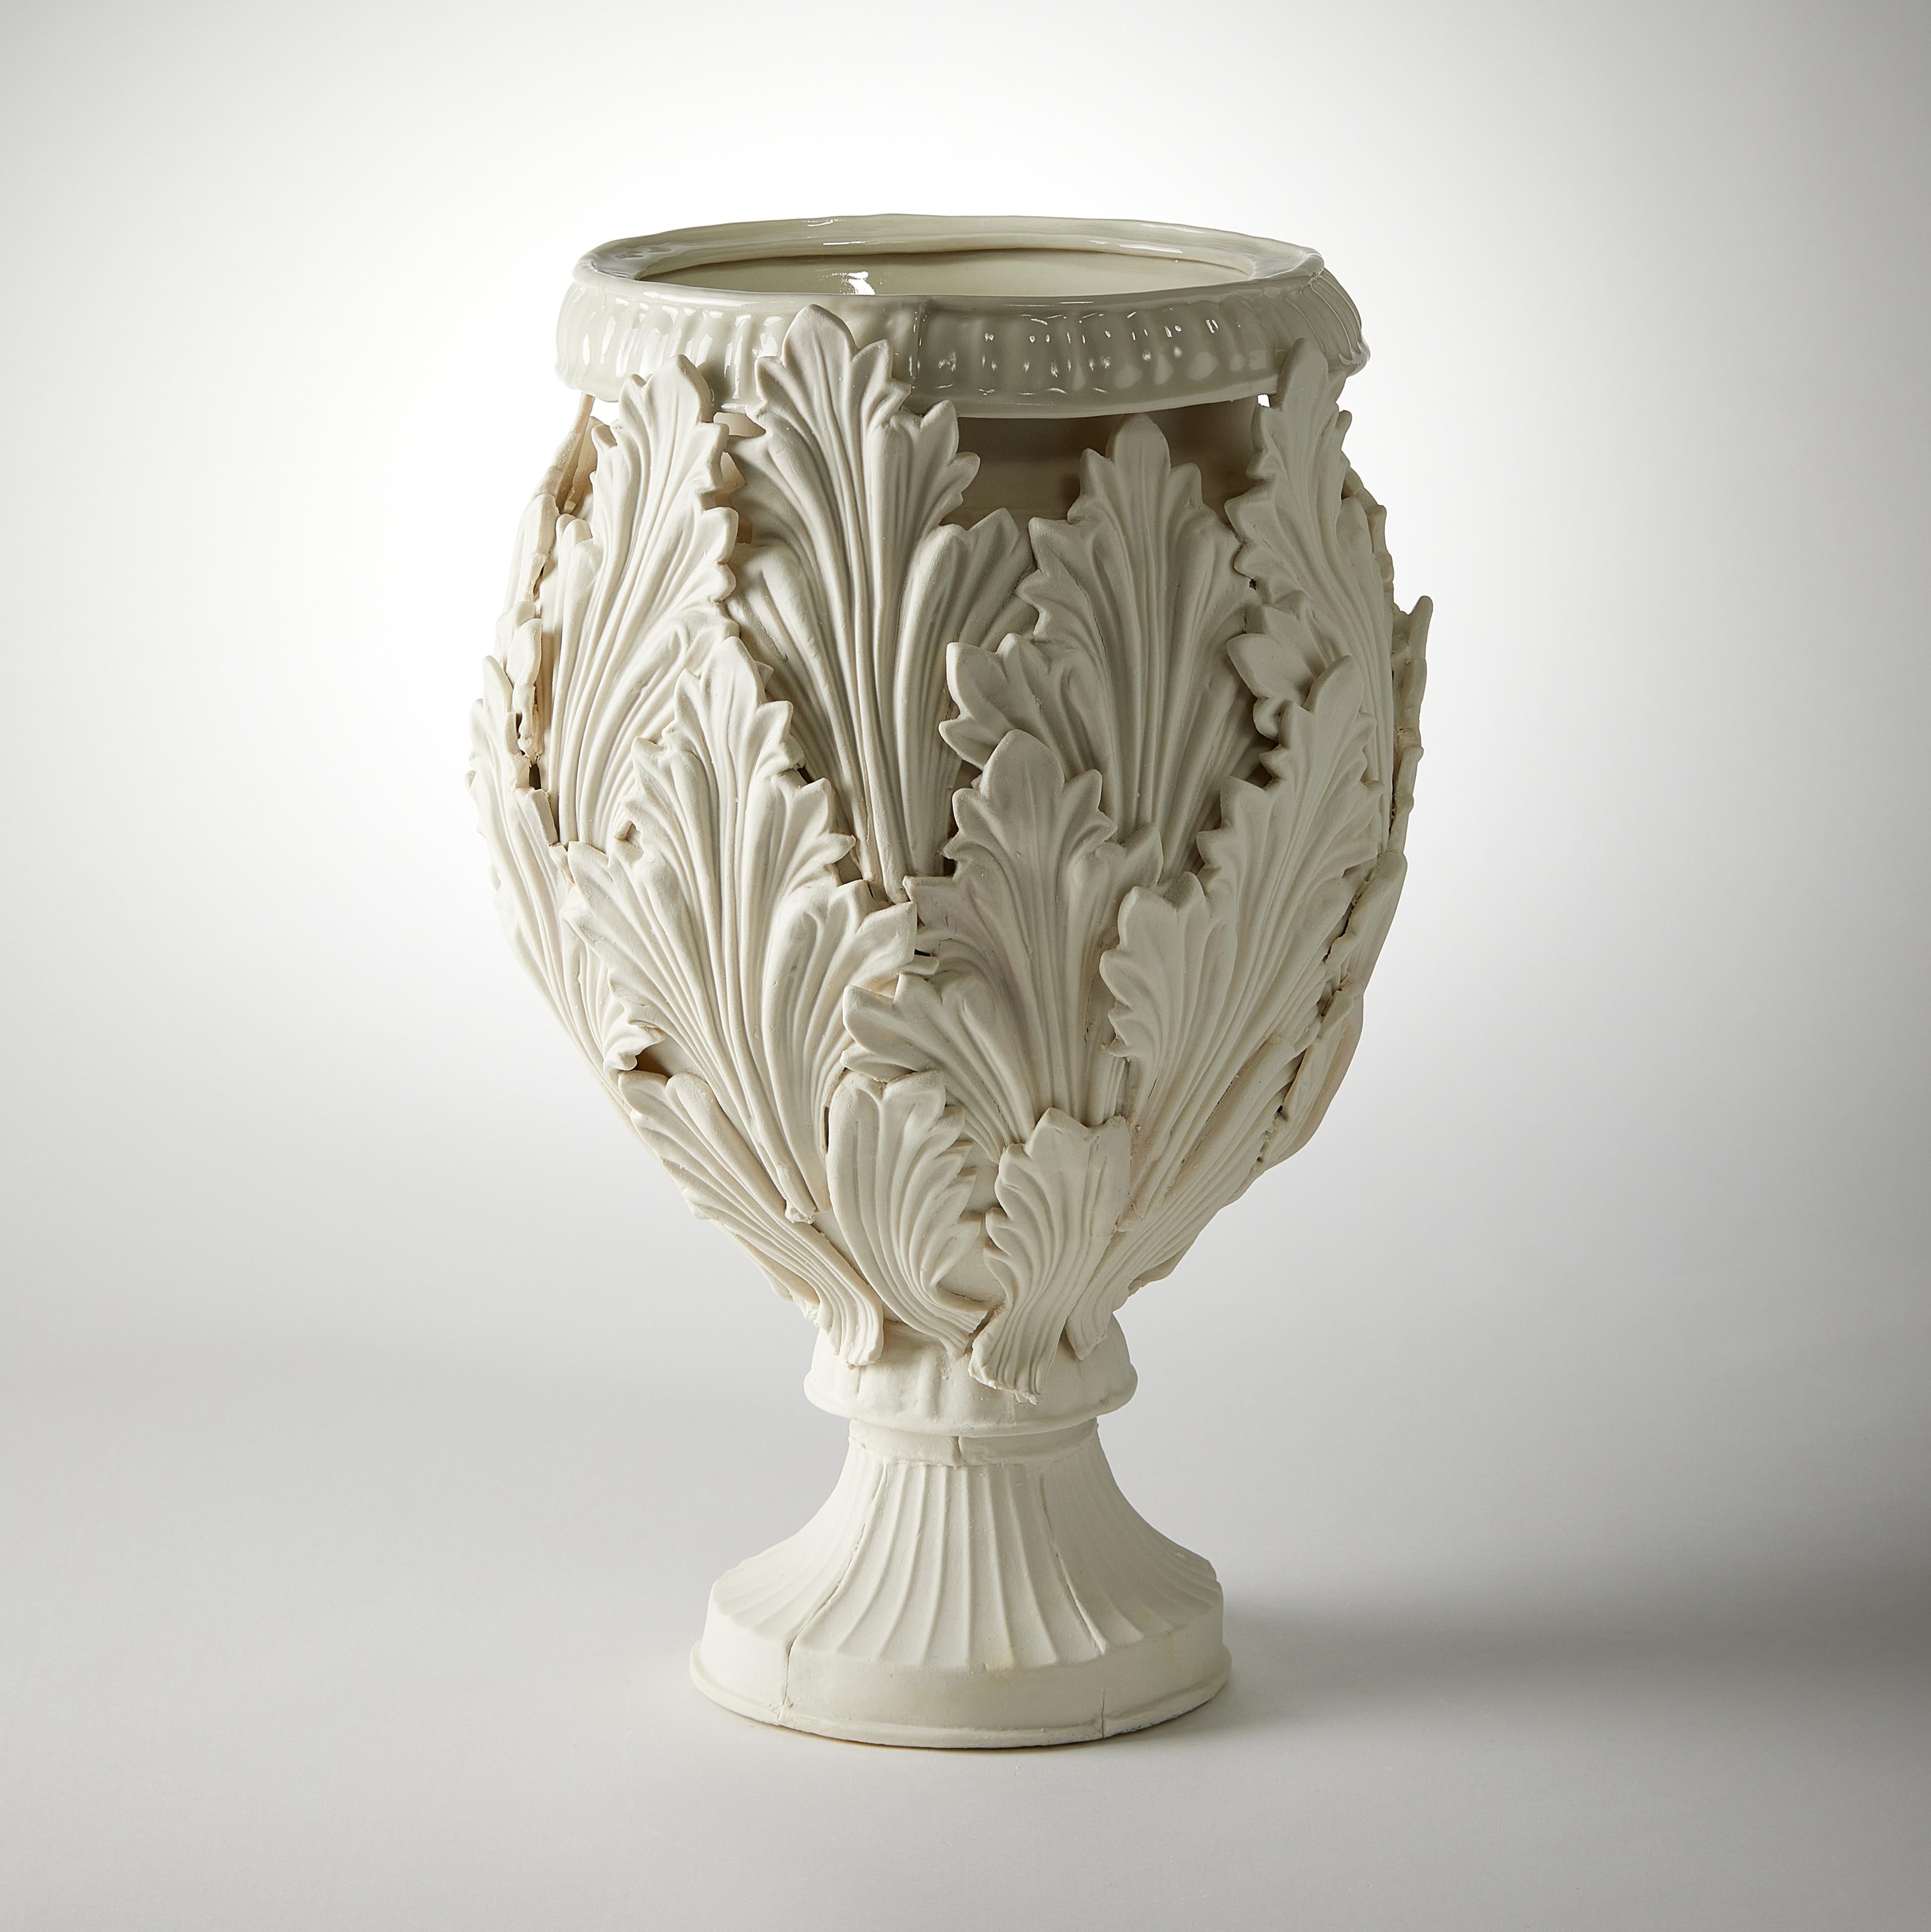 Acanthus II is a unique hand made porcelain vase with leaf decoration by the British artist Amy Hughes.

Originally from West Yorkshire, Amy Hughes lives and works in London. She shares a studio with 10 of her former students from the Royal